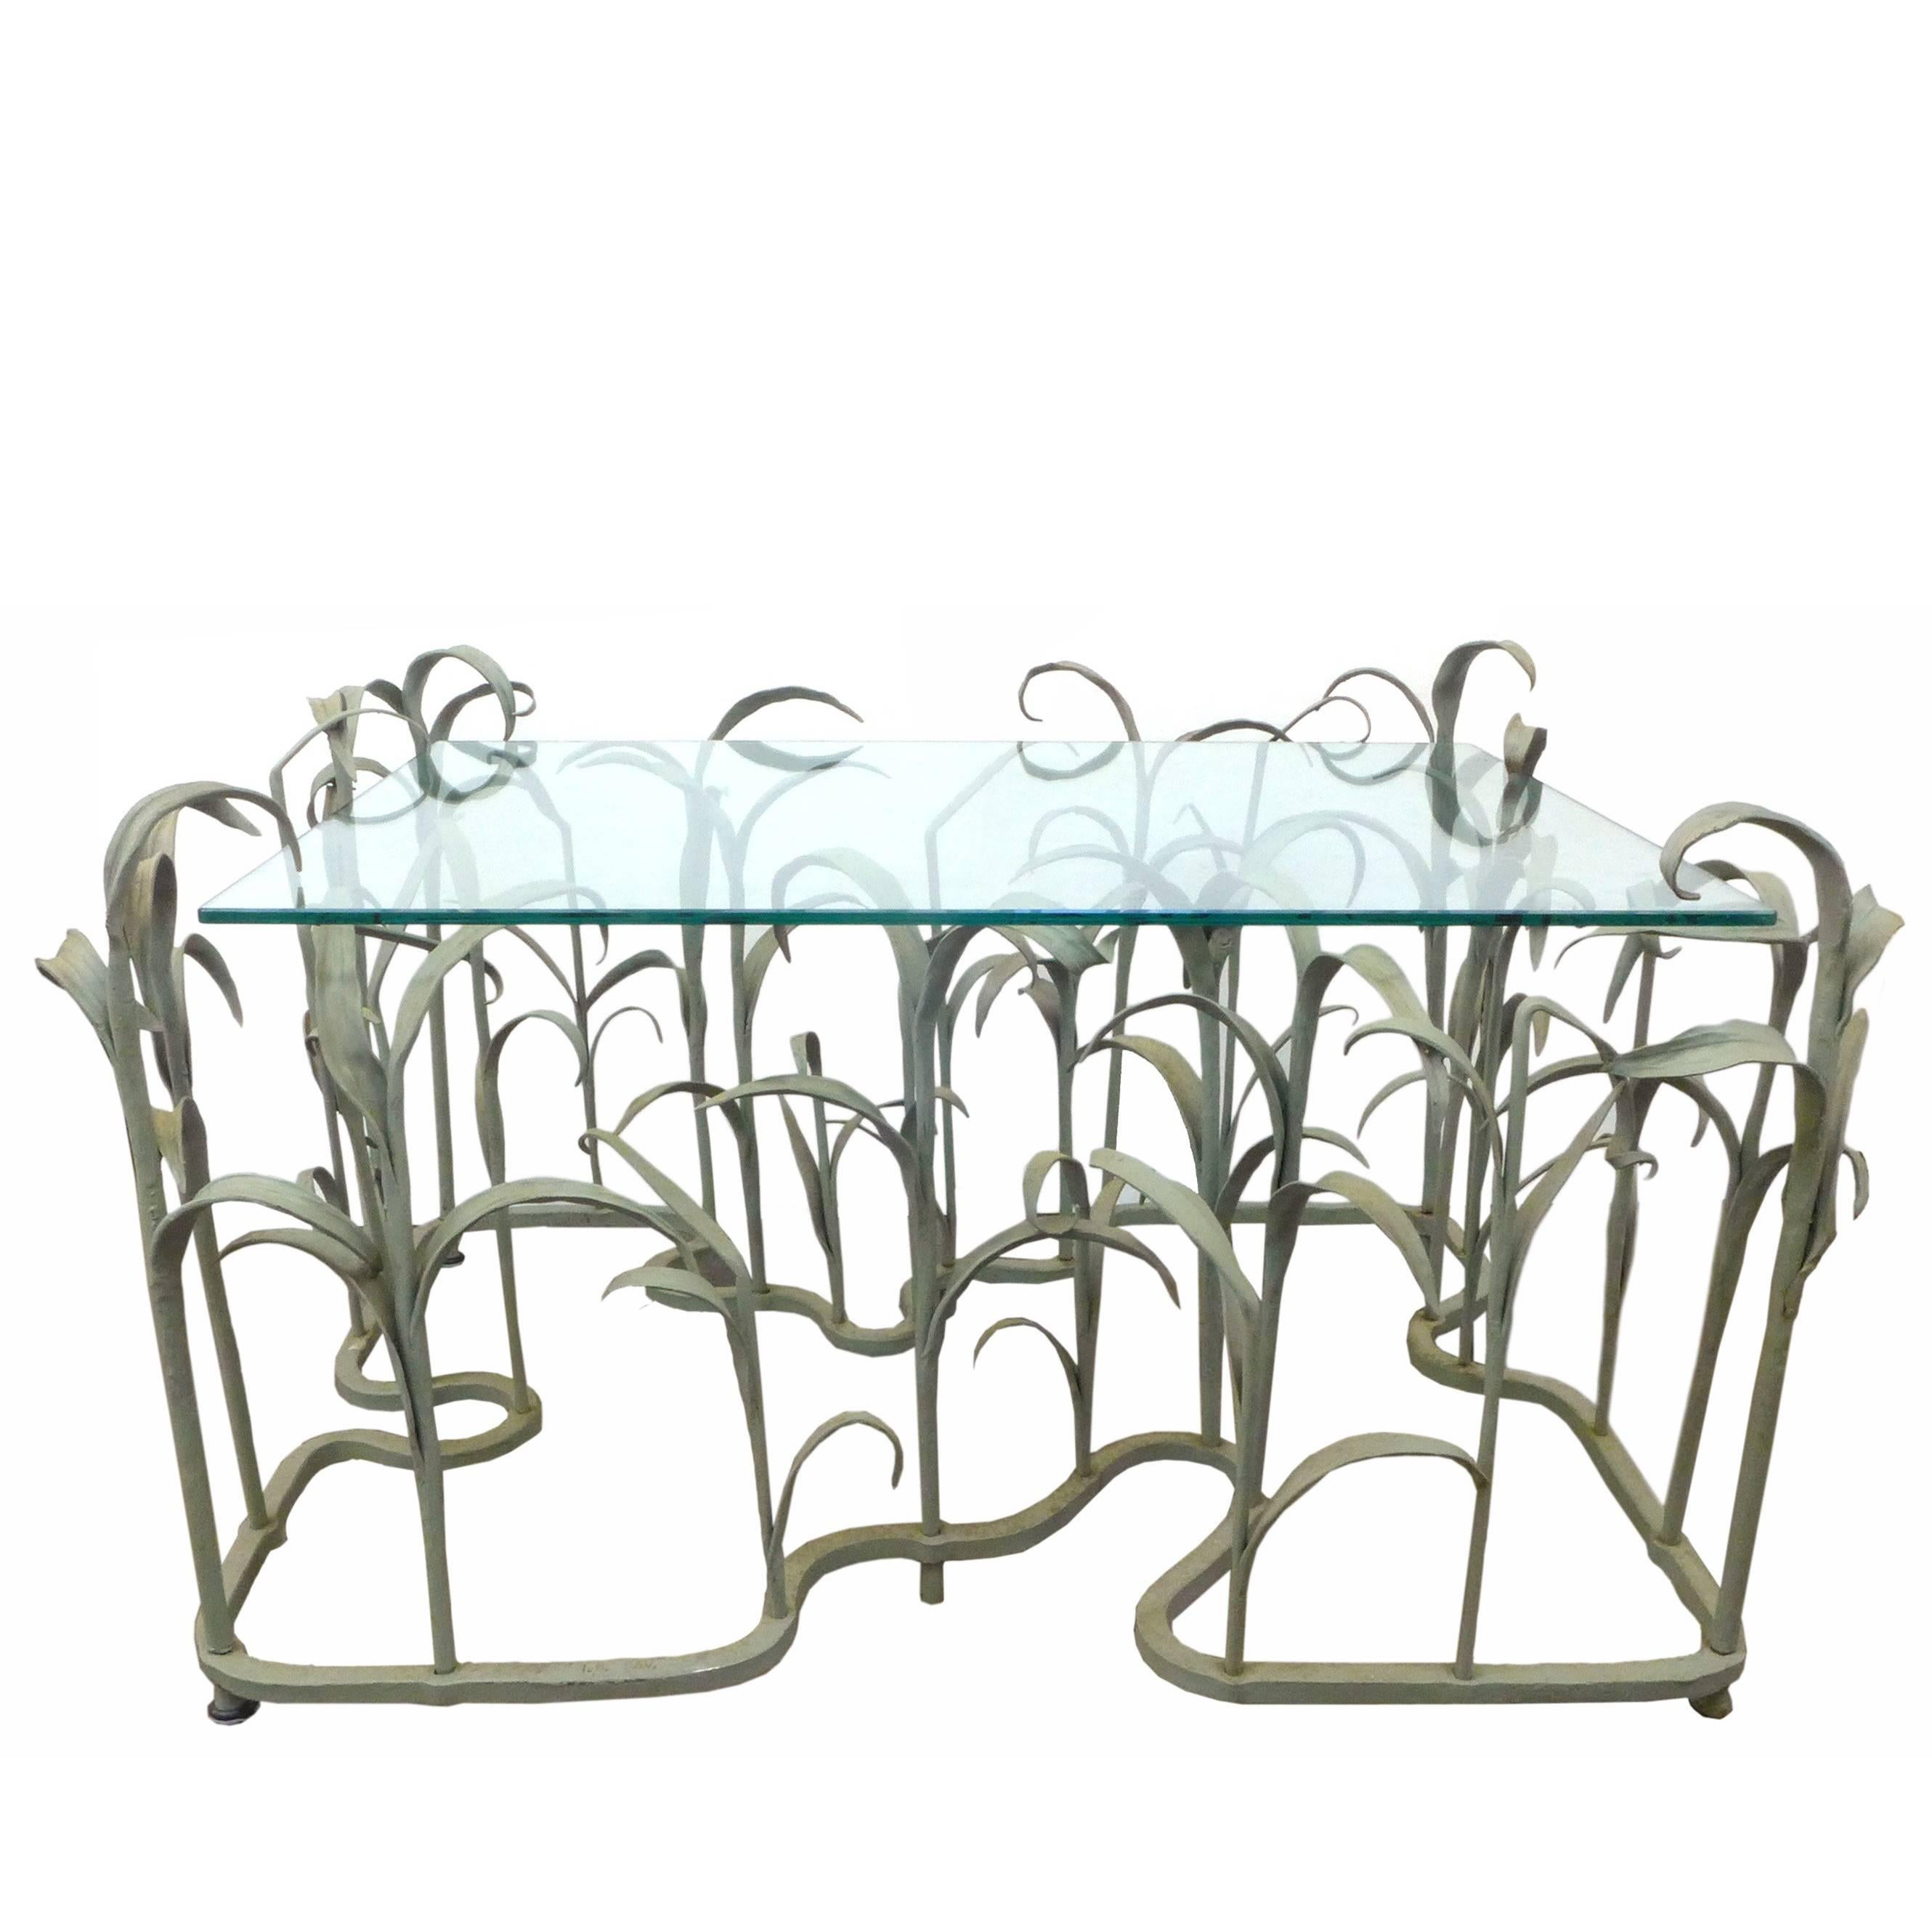 Wrought Iron and Glass "Tall Grass" Coffee Table For Sale